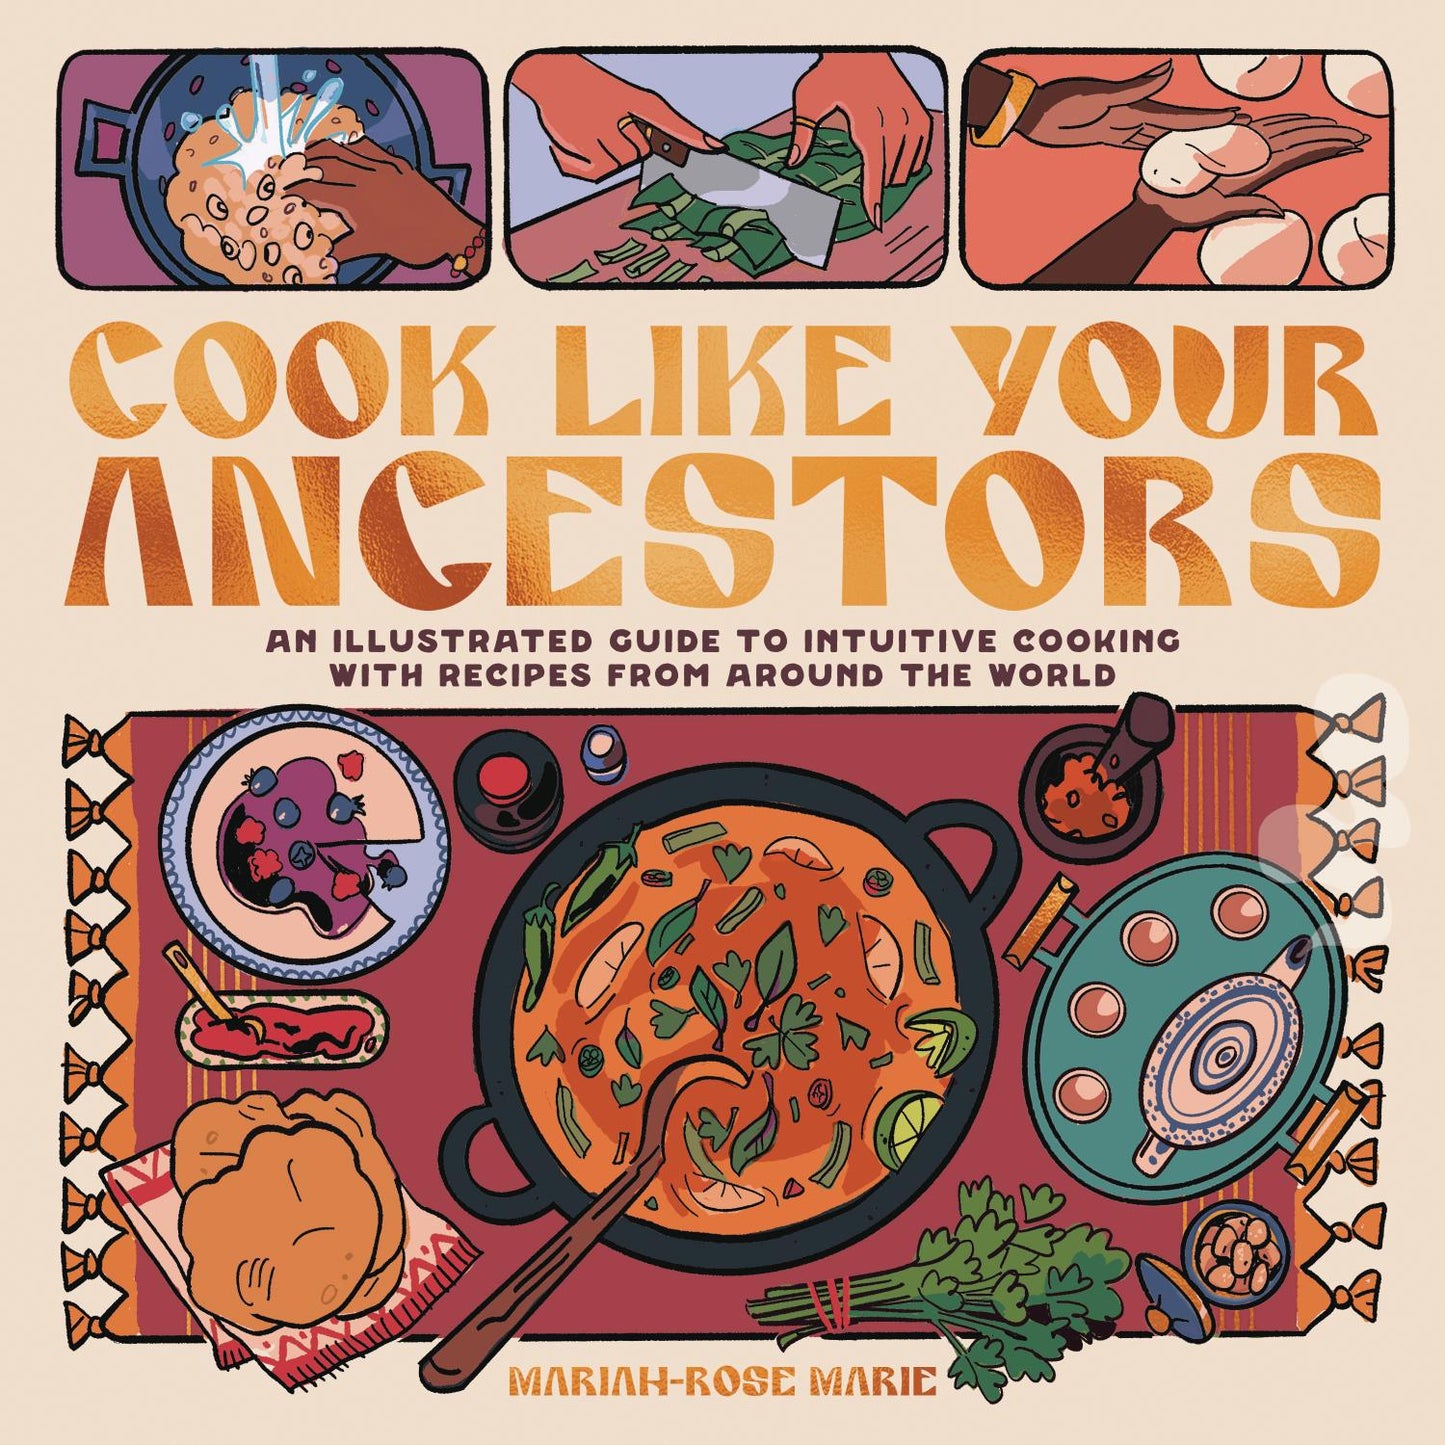 Cook Like Your Ancestors: An Illustrated Guide to Intuitive Cooking With Recipes From Around the World